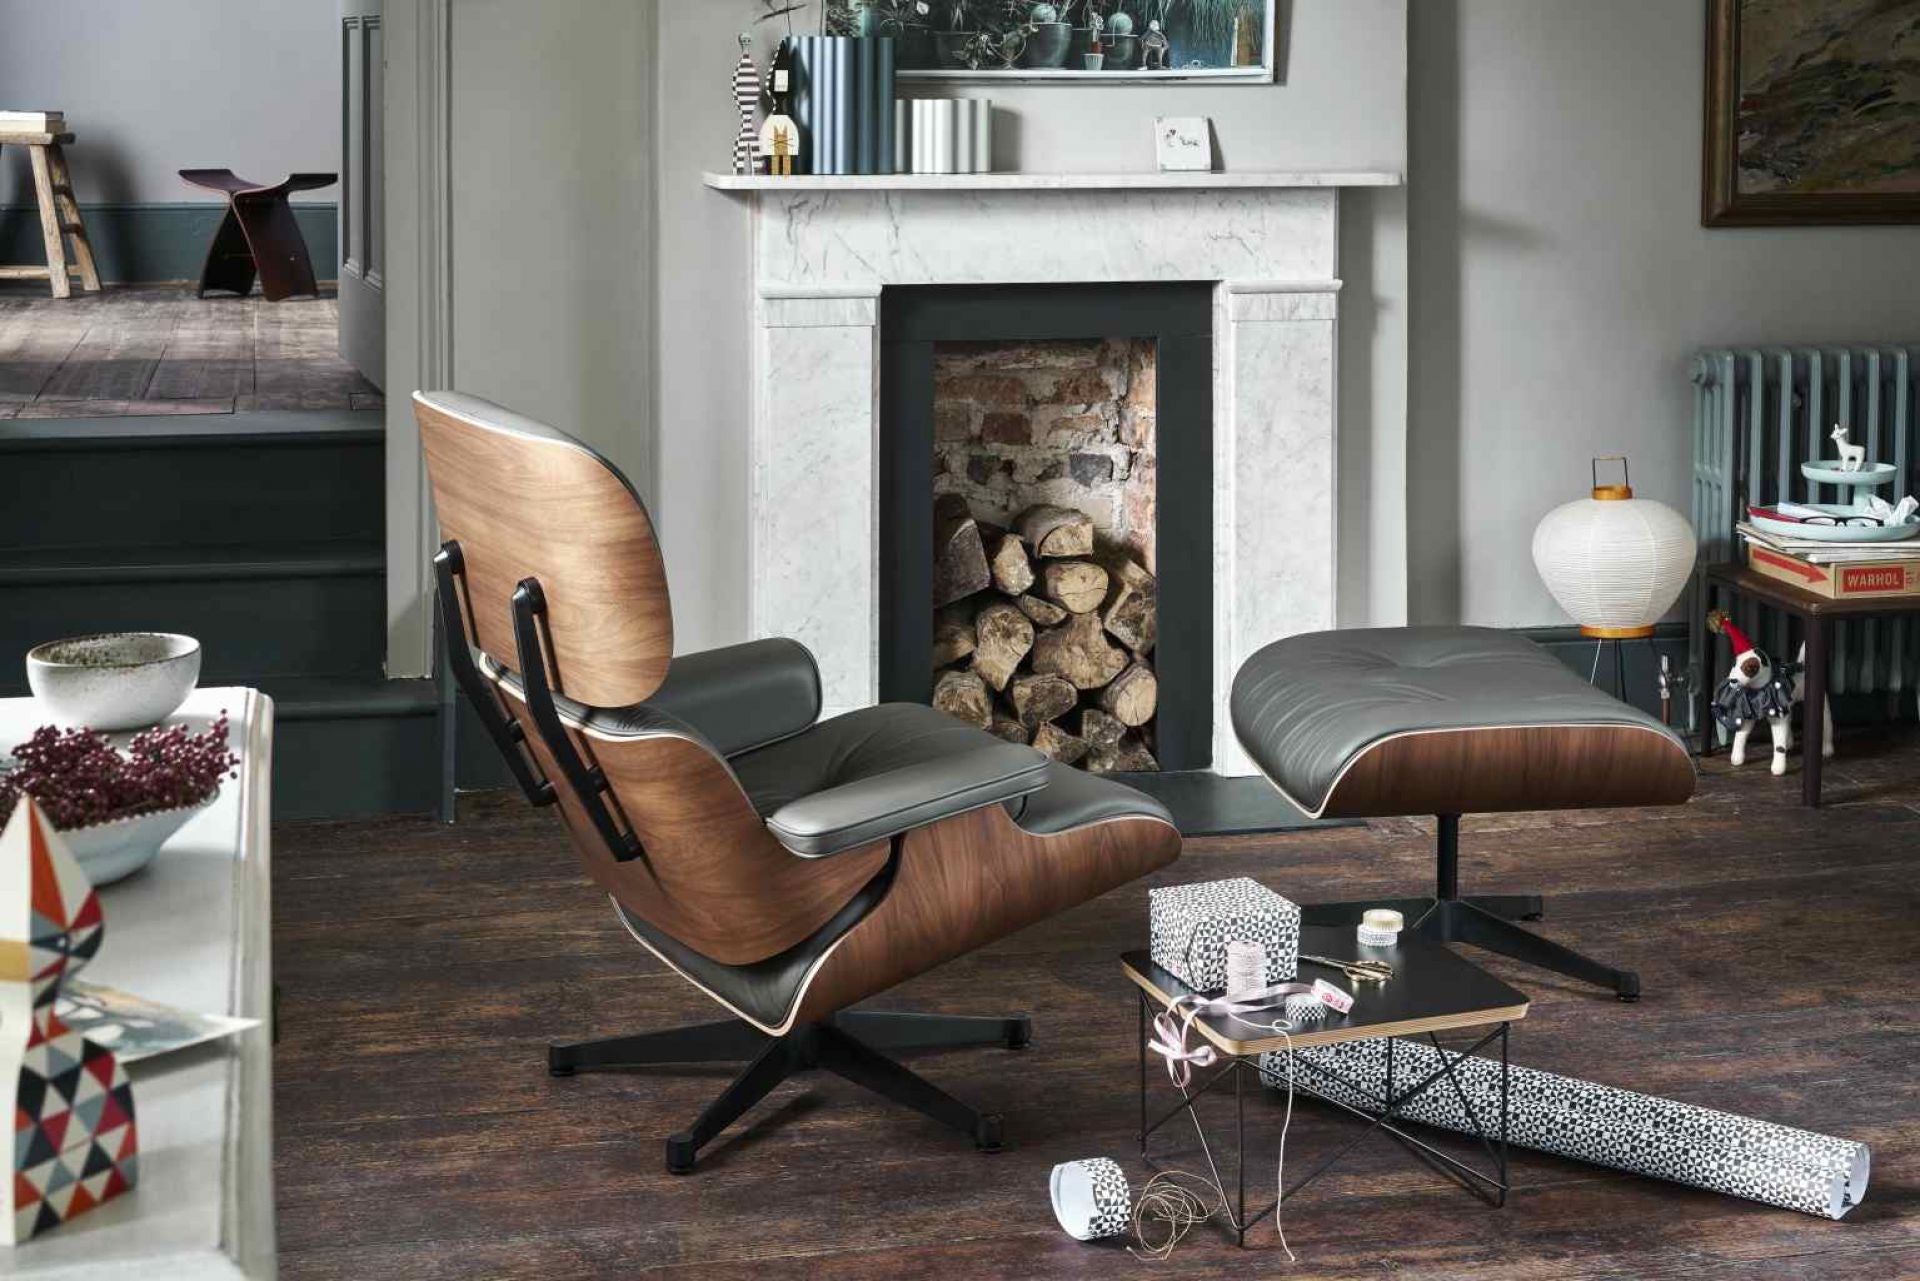 Who Makes the Best Eames Lounge Chair Replica?